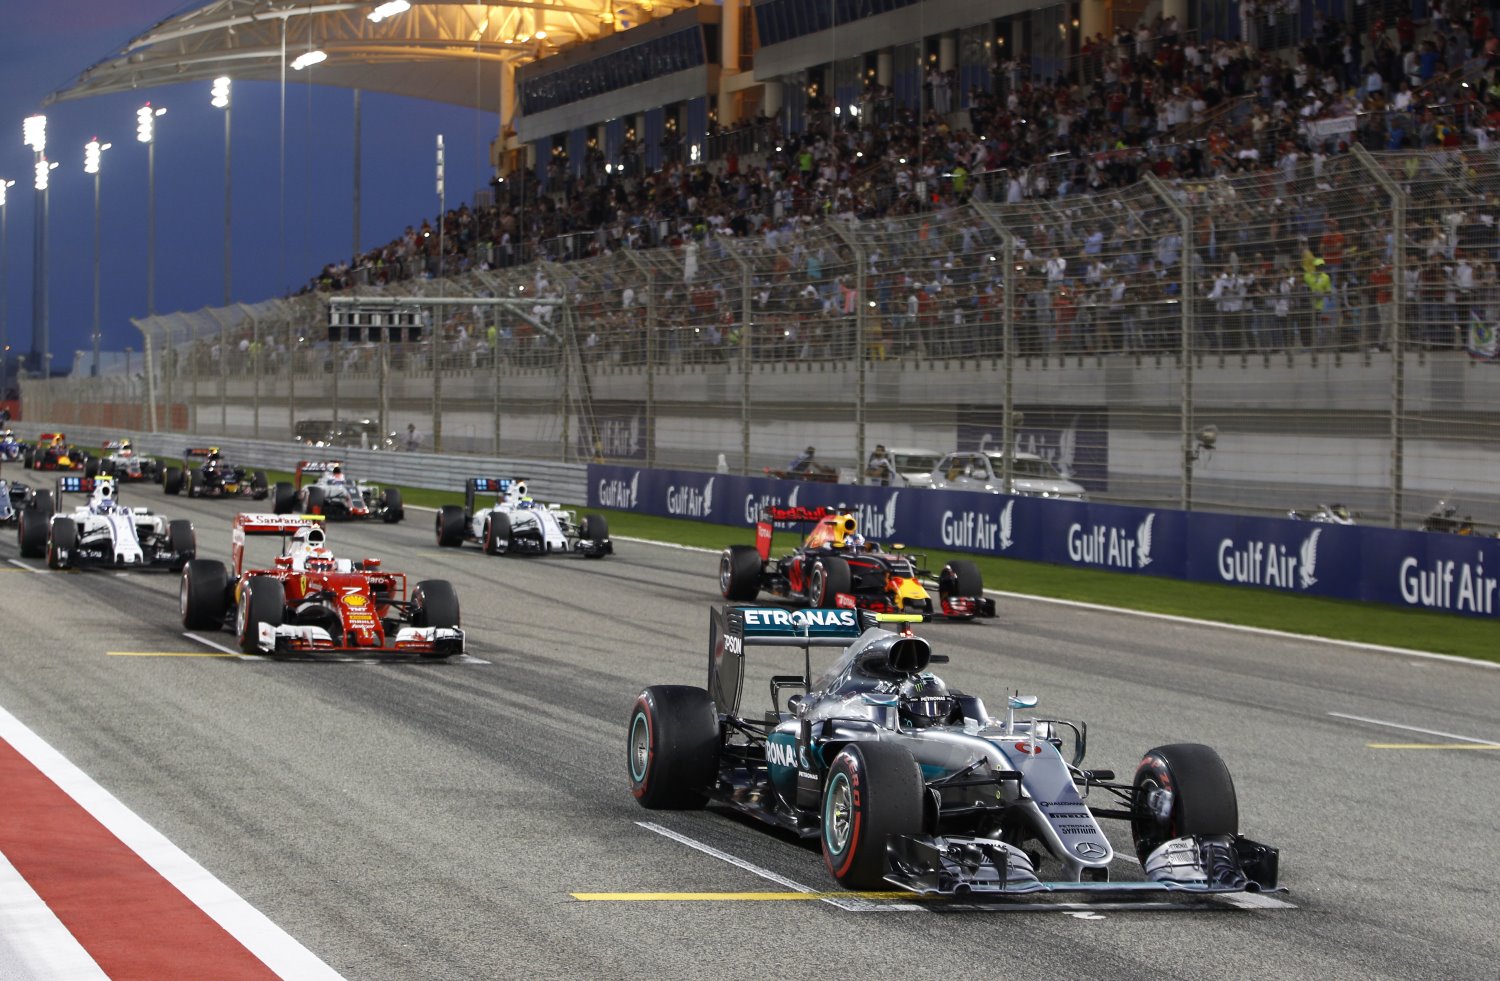 Cars are ready for start in Bahrain